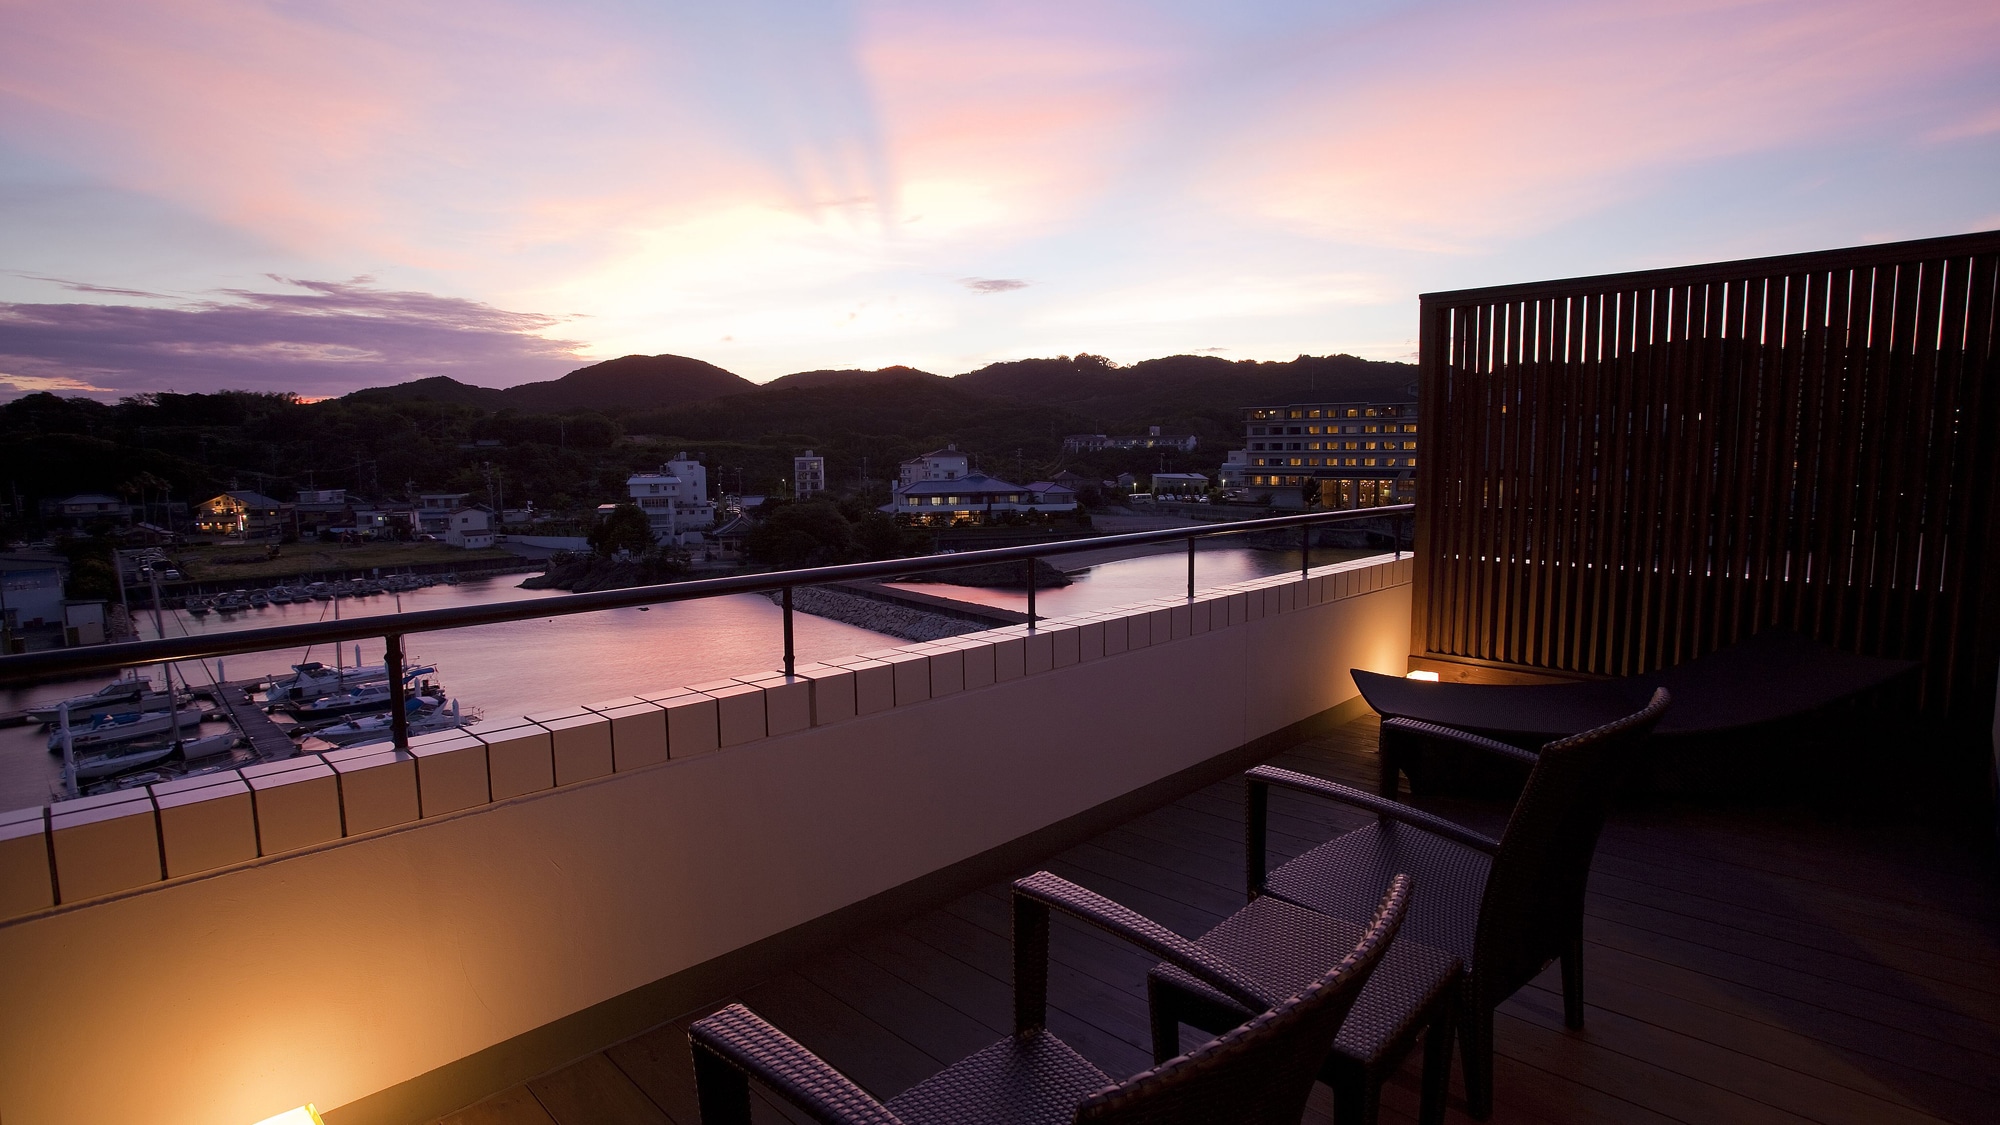 ≪Harbor spa terrace room with open-air hot spring bath≫